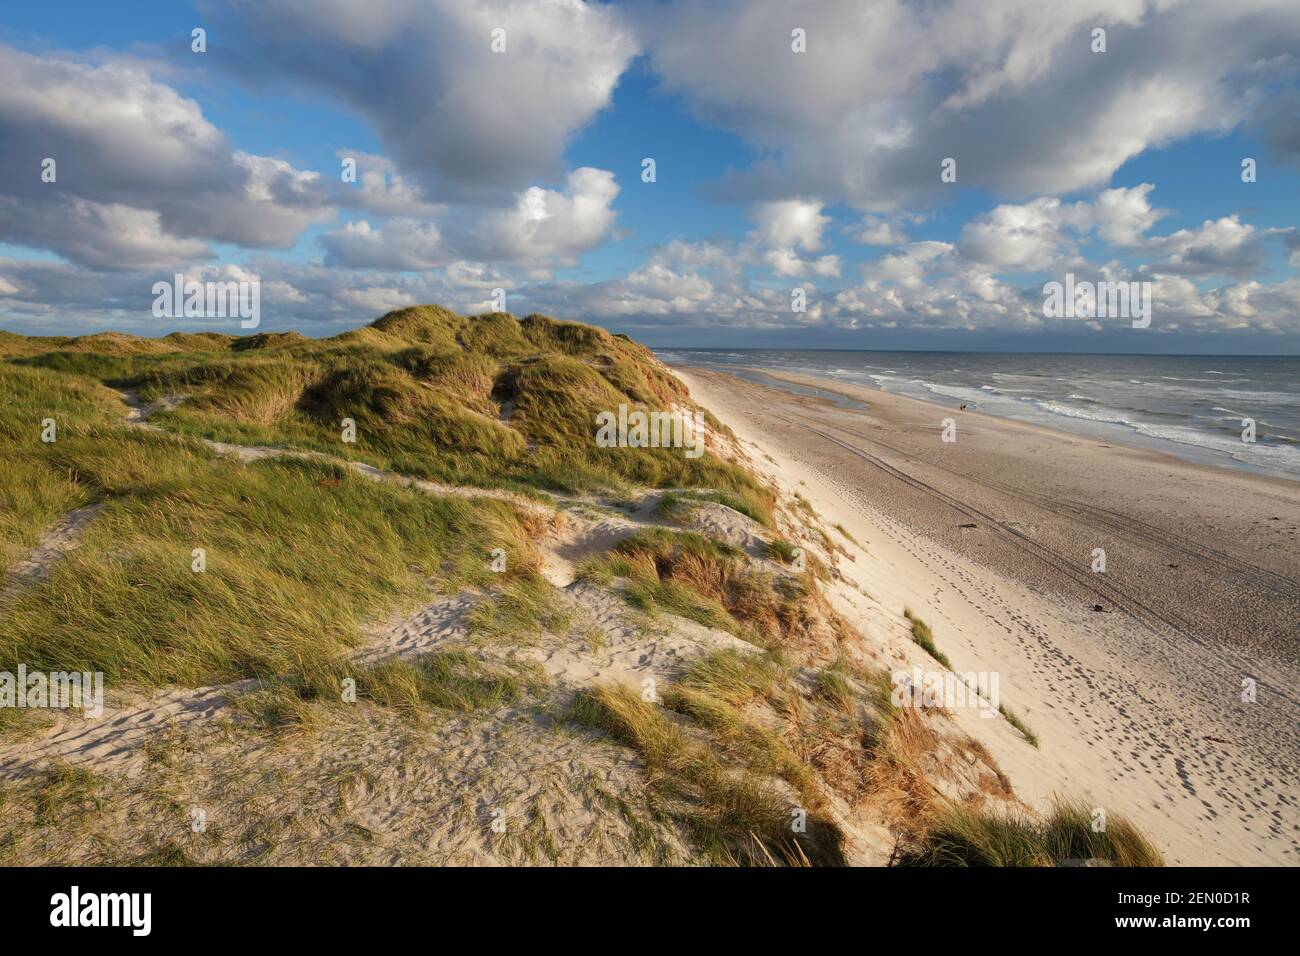 beach and dunes of Hvide Sande at the North Sea, Denmark Stock Photo